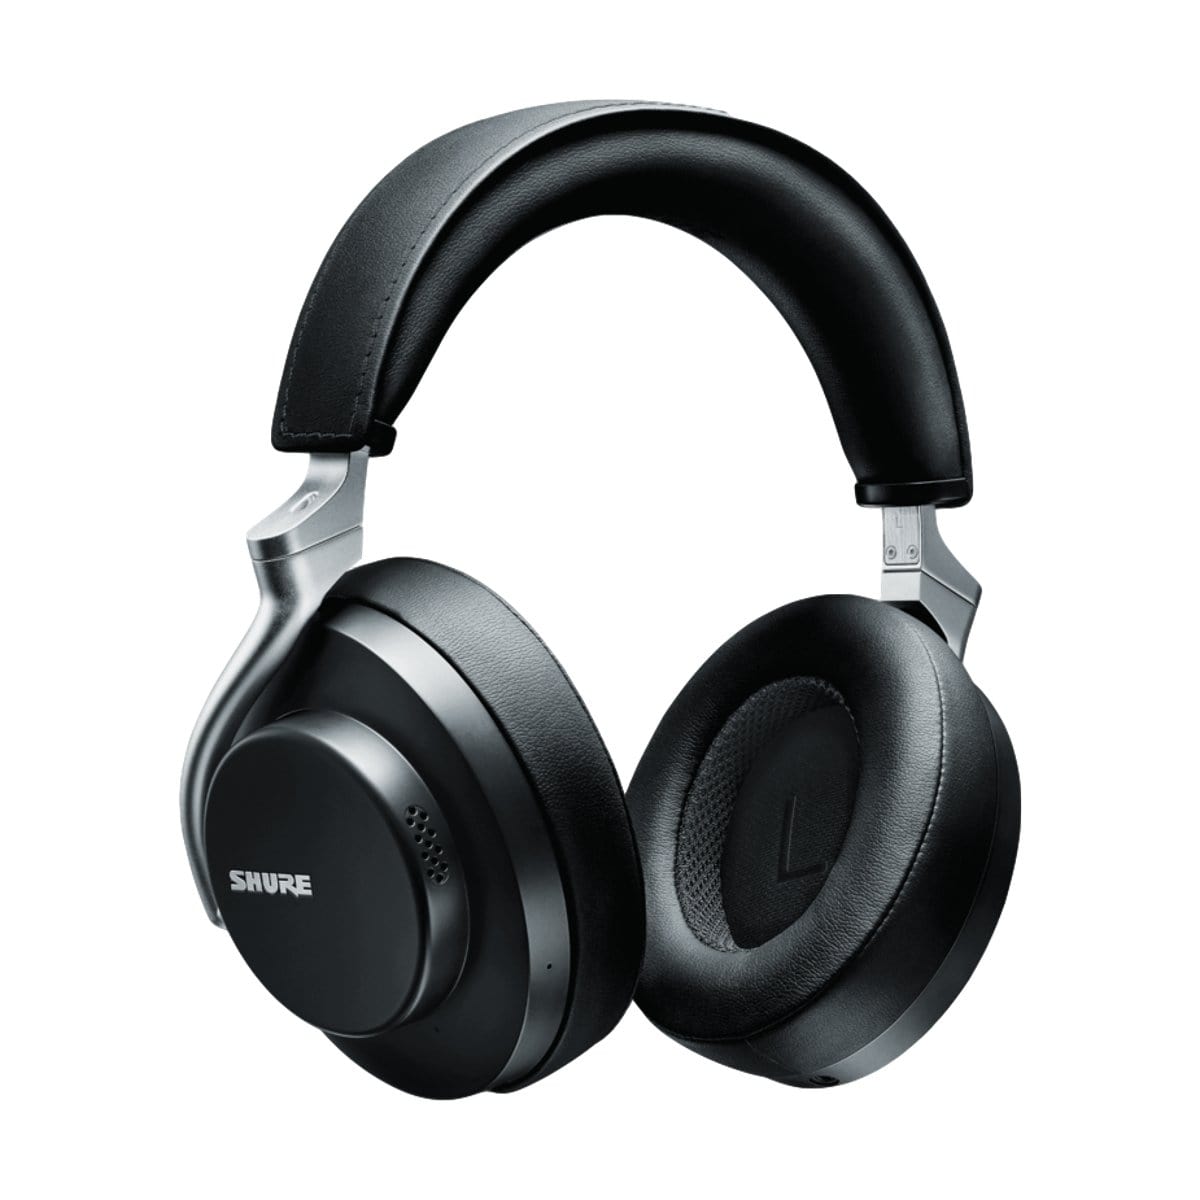 Shure Recording Shure AONIC 50 Wireless Noise Cancelling Headphones Black - Byron Music